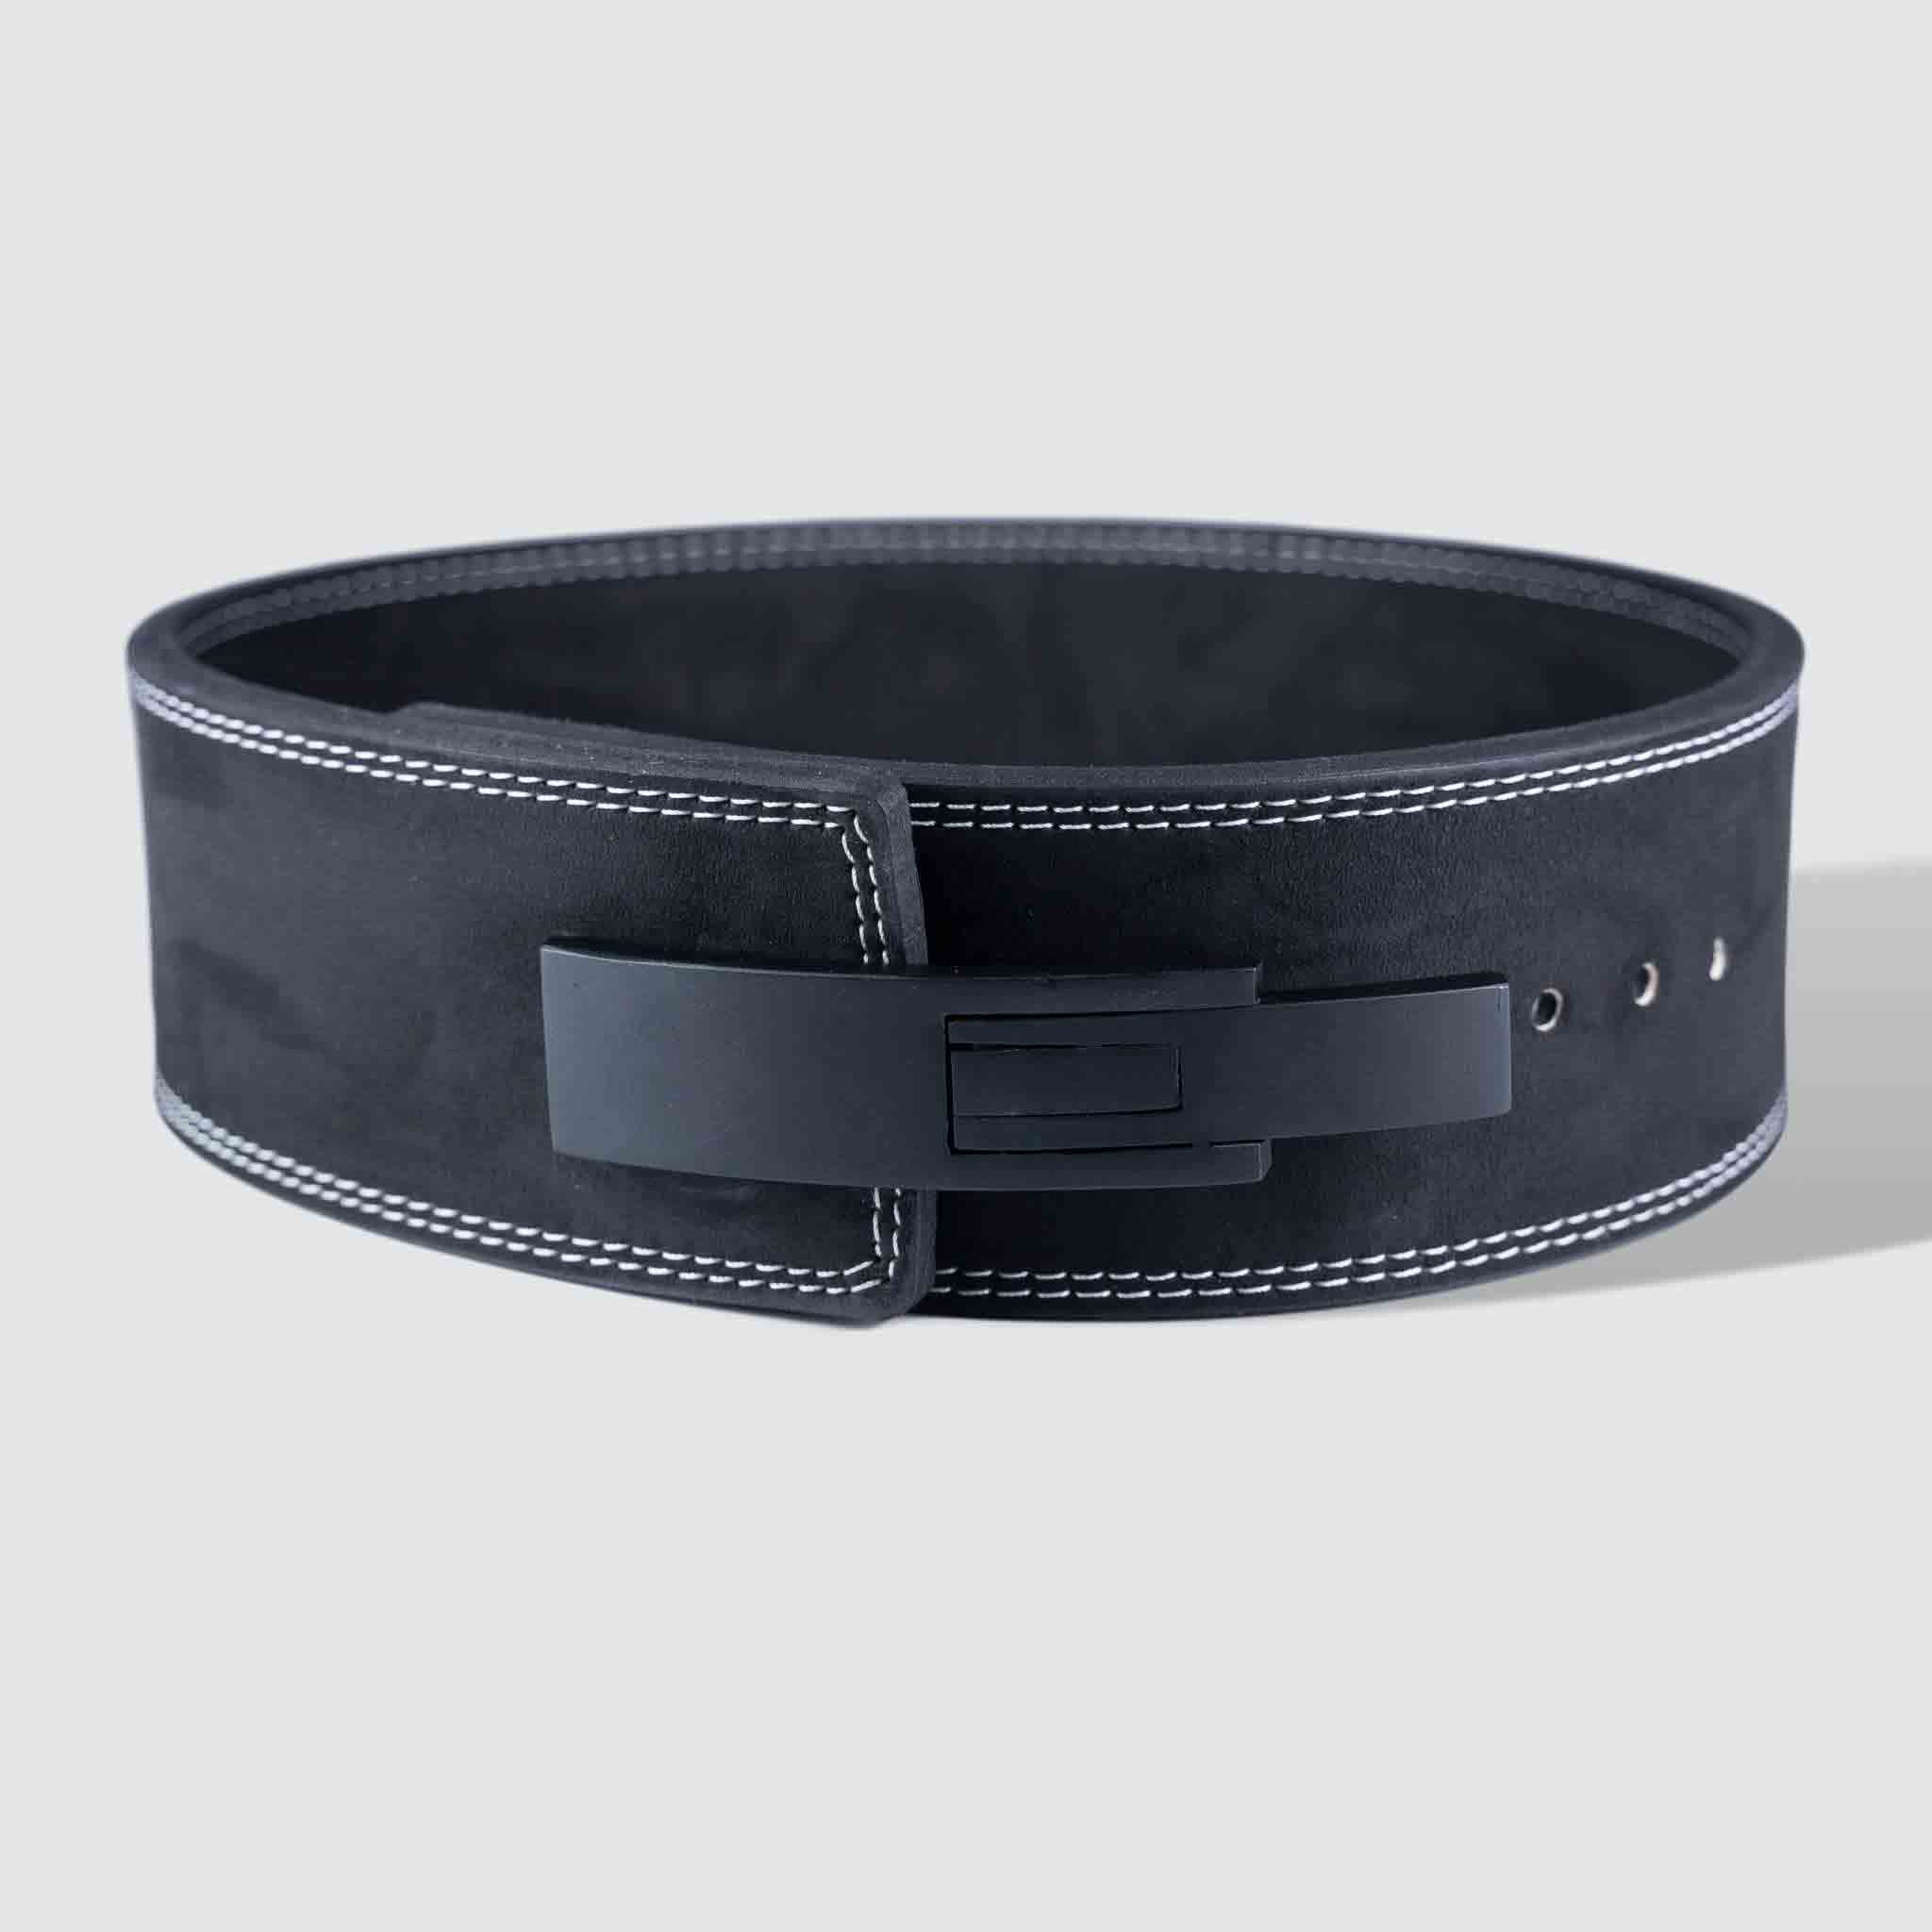 Powerlifting Lever Belt 10mm Thick Leather Weight Lifting Belt for